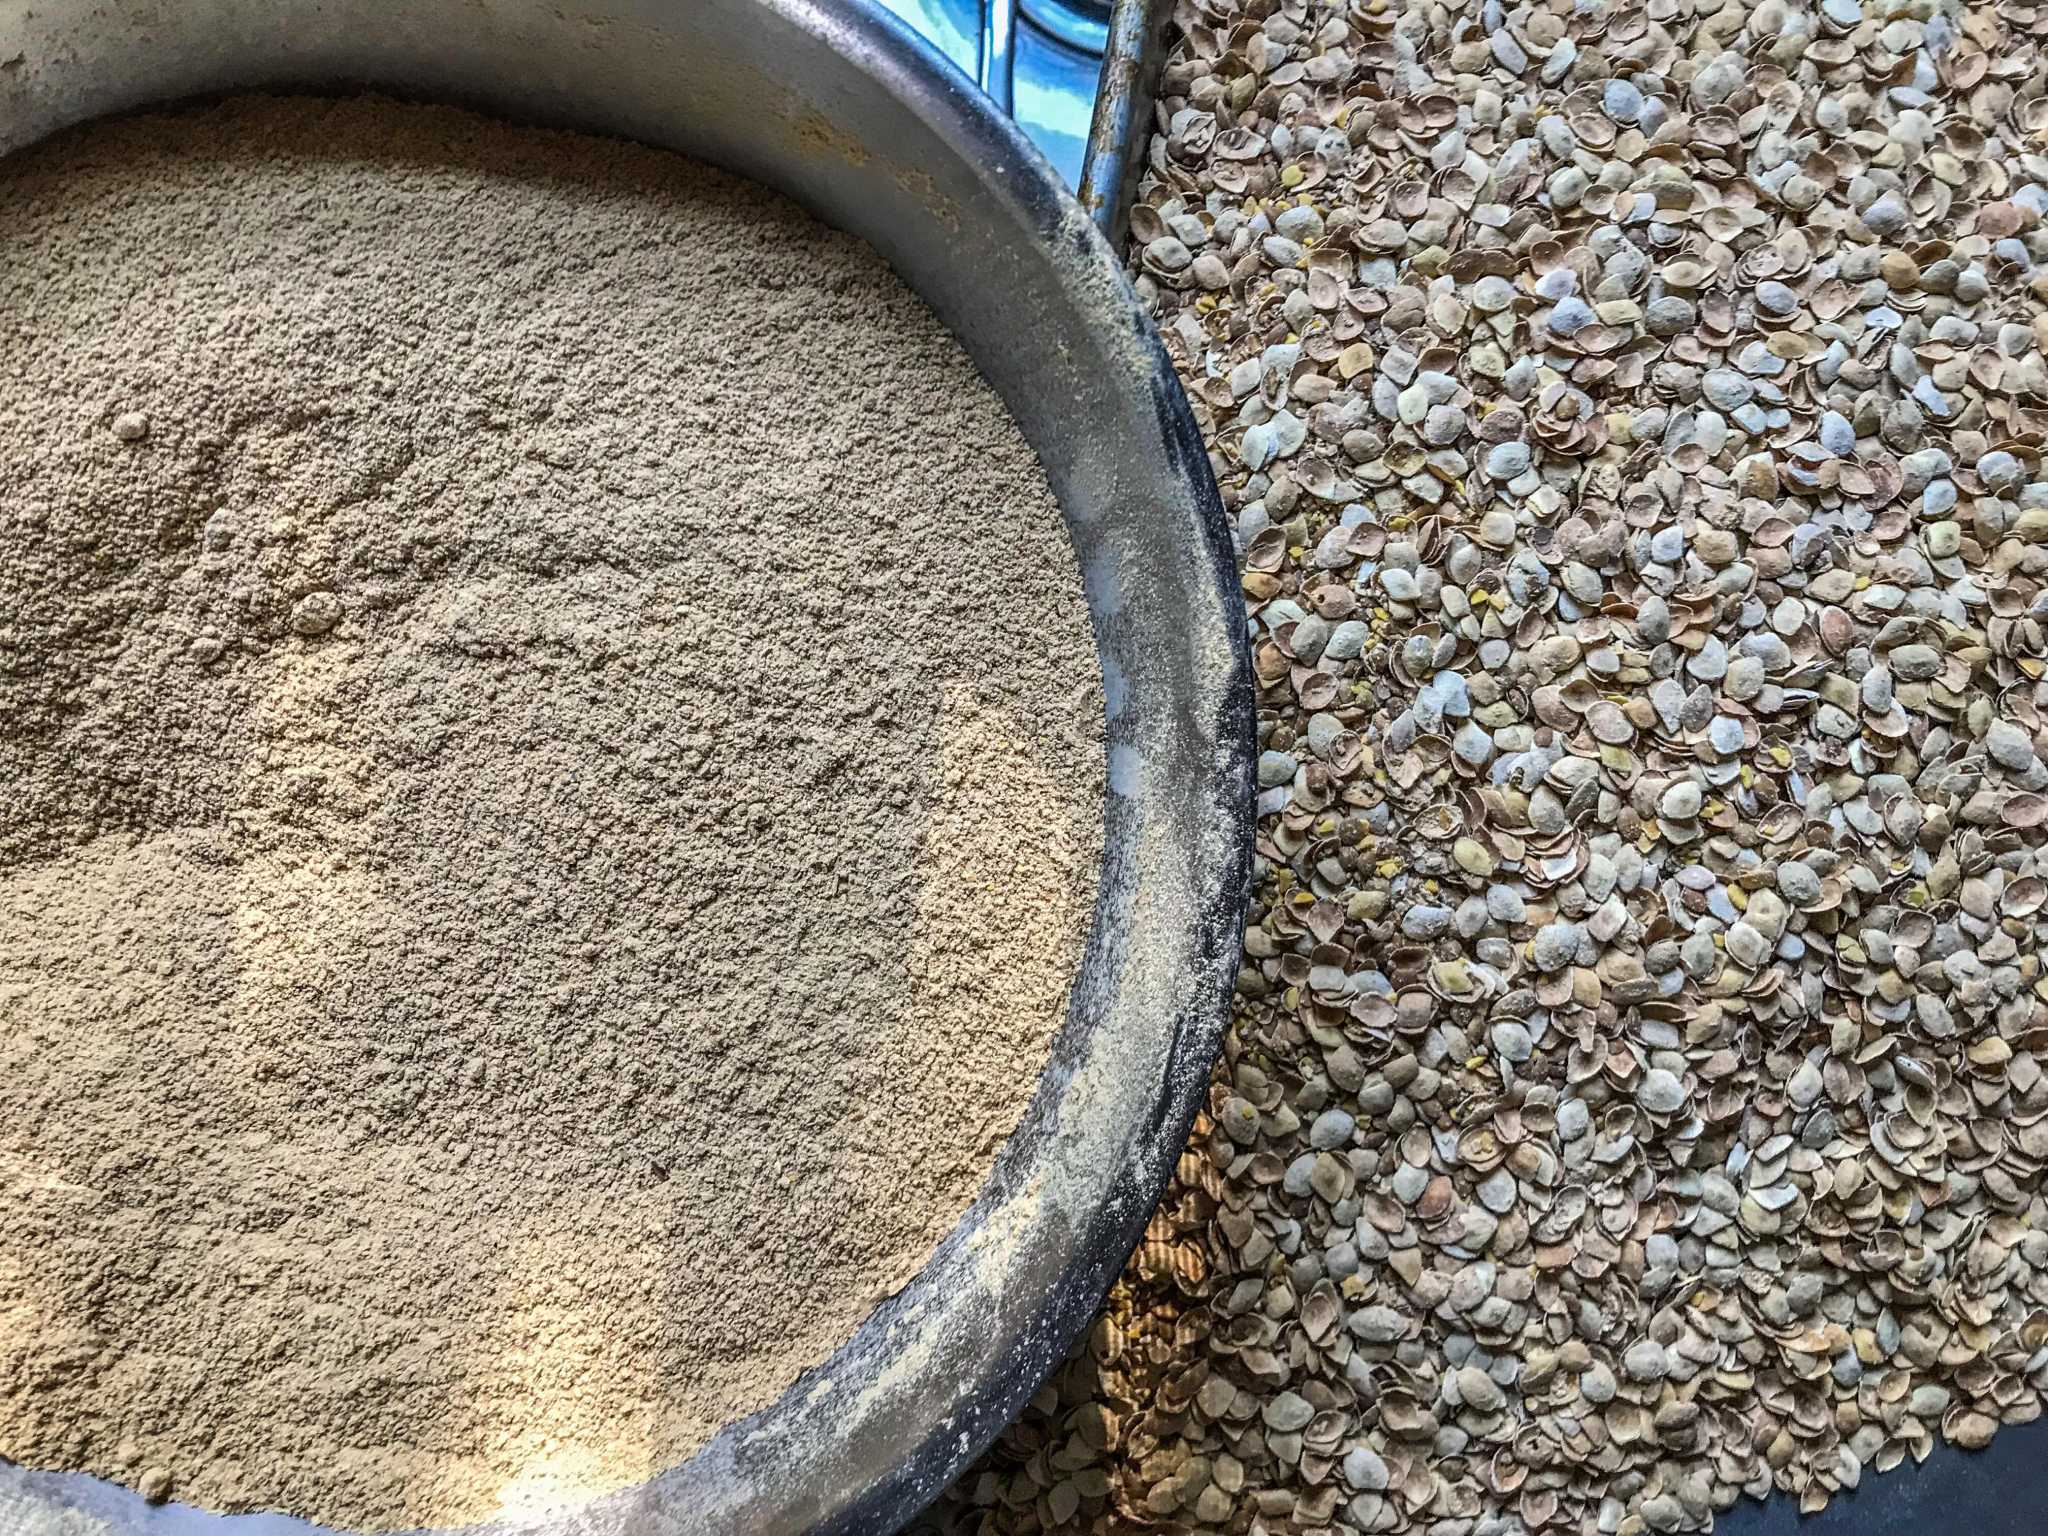 How to make flour from the mesquite pods in your San Antonio yard